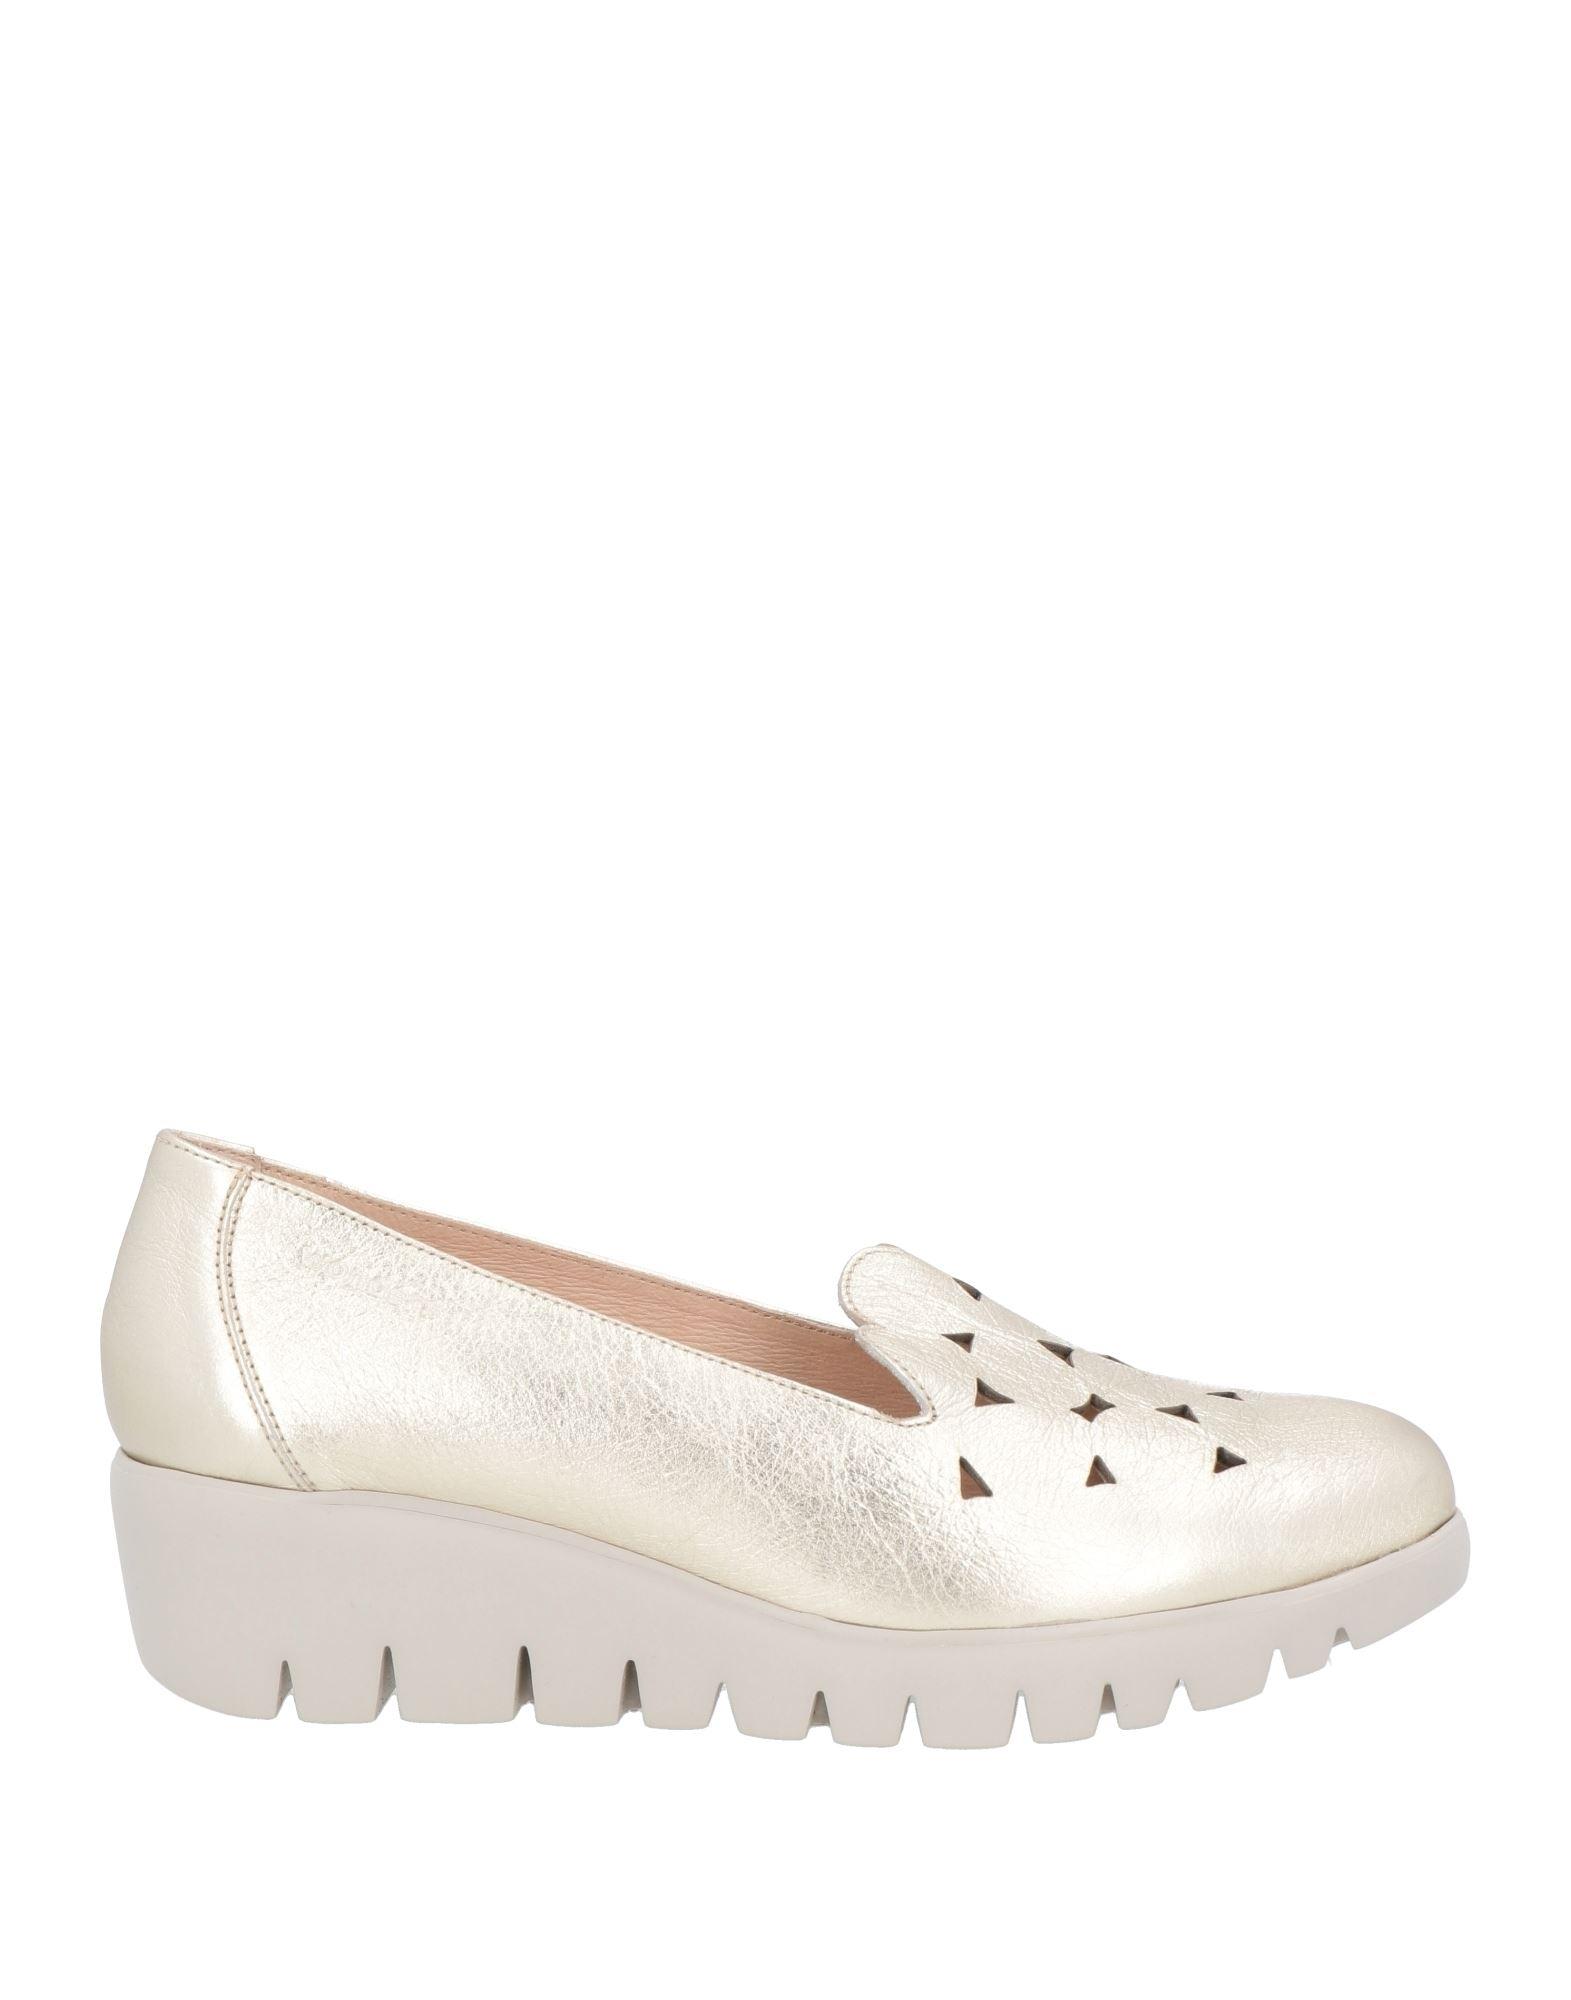 Wonders Loafers in Natural | Lyst